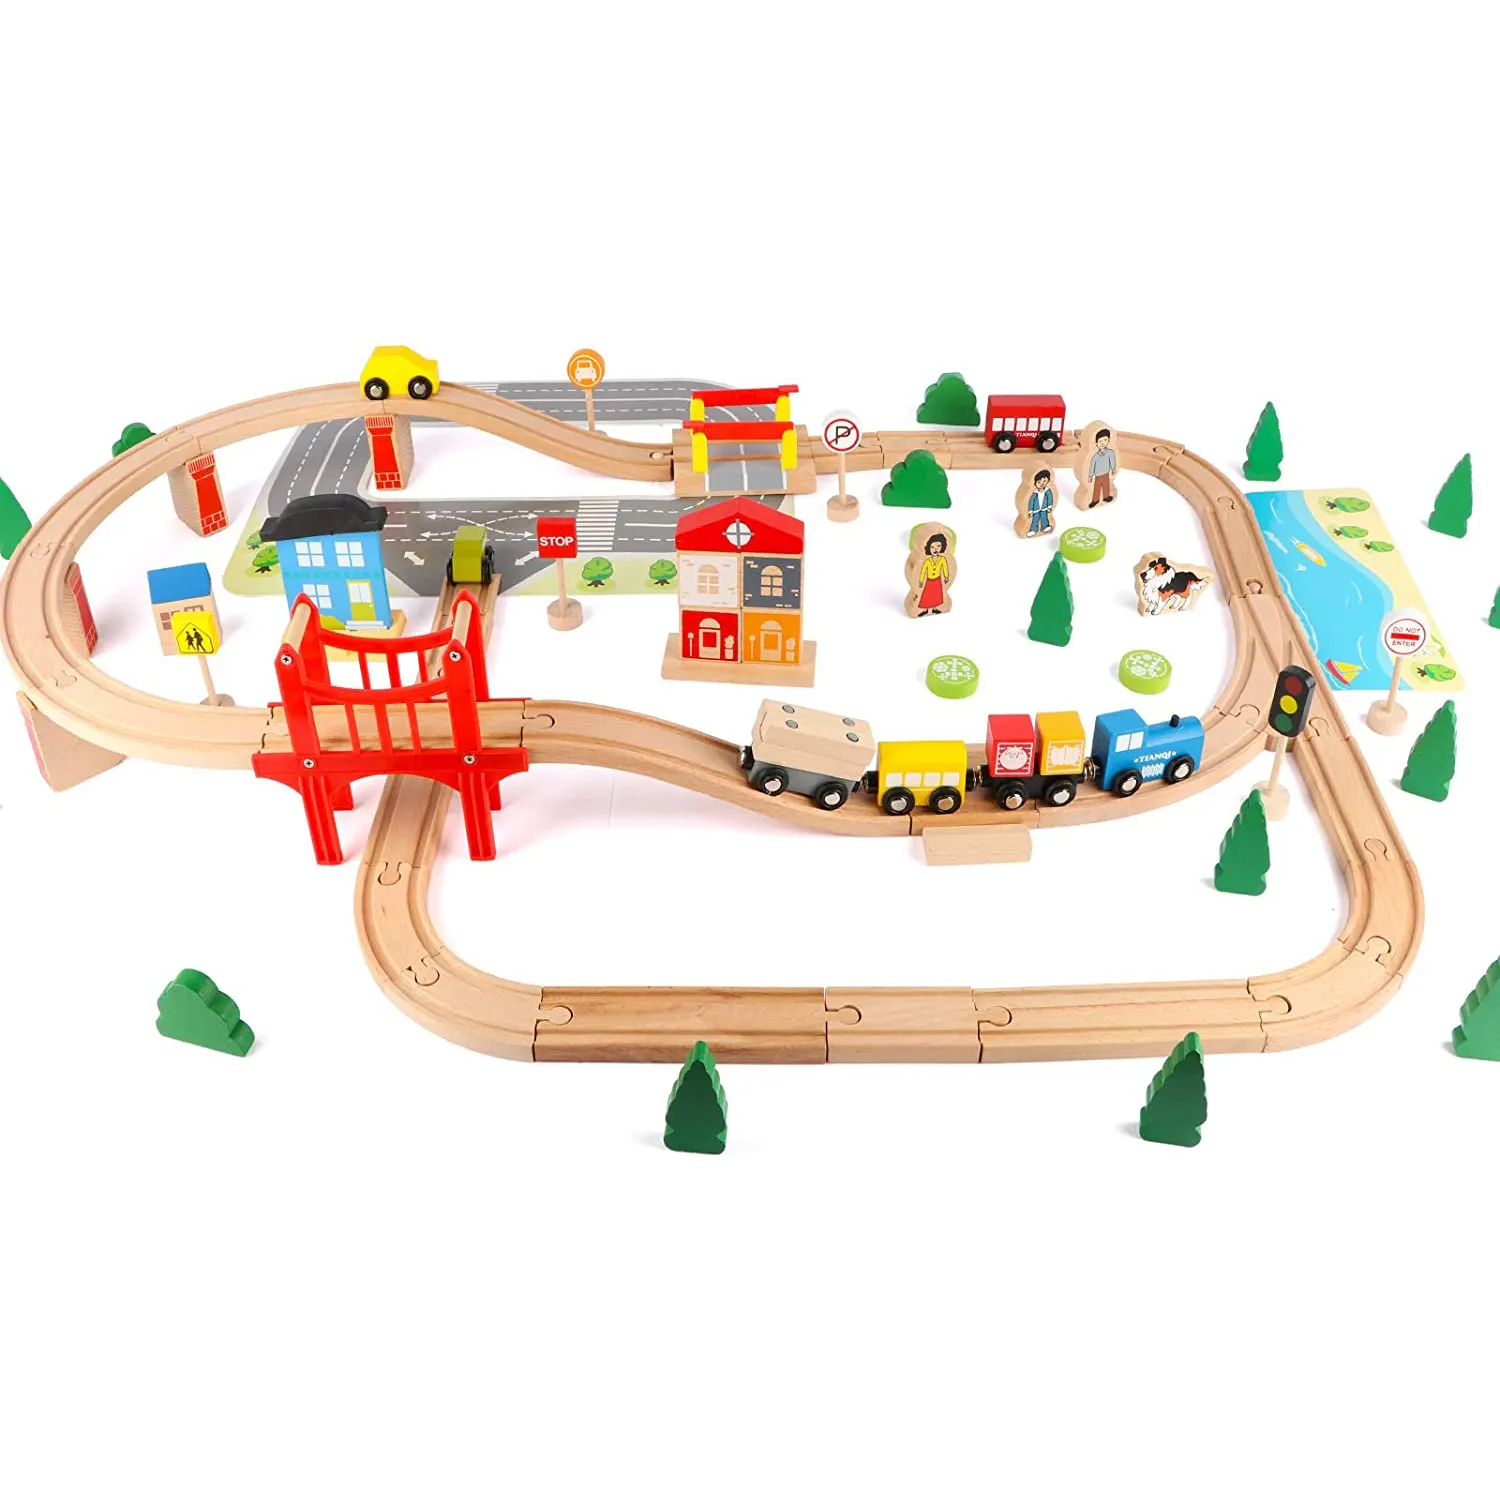 Wholesale cheap educational 70 pcs railway wooden toy train sets for kids wooden railway toys